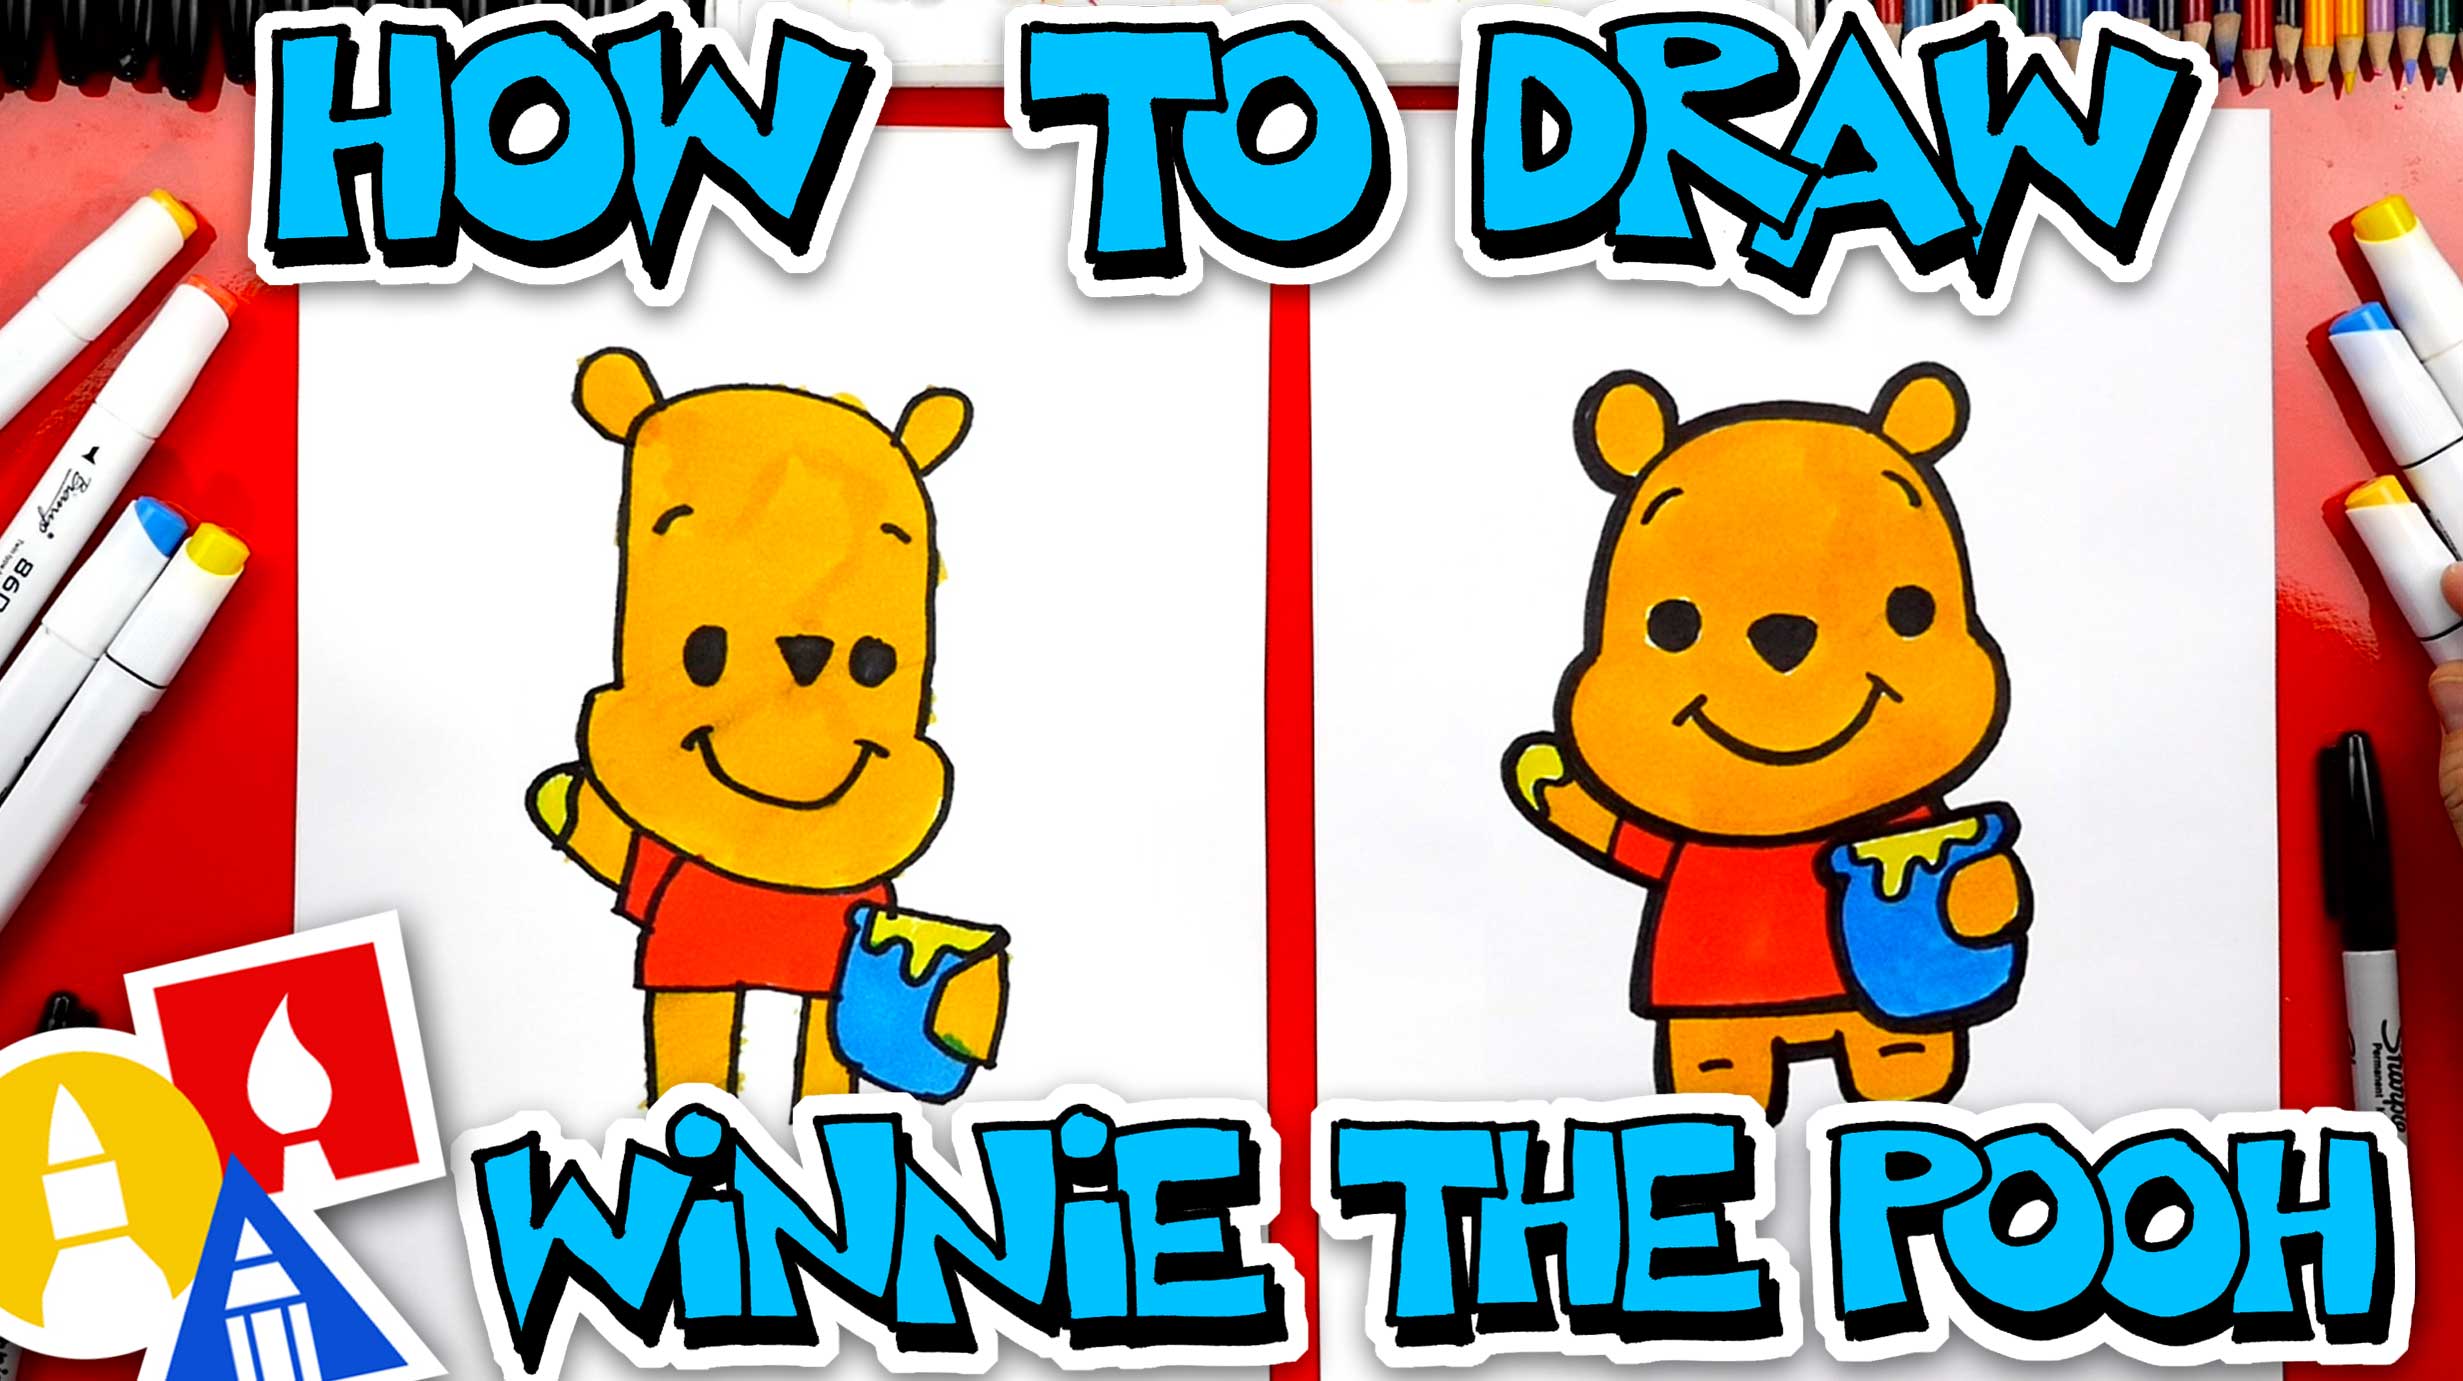 Winnie the pooh drawing, Winnie the pooh pictures, Whinnie the pooh drawings